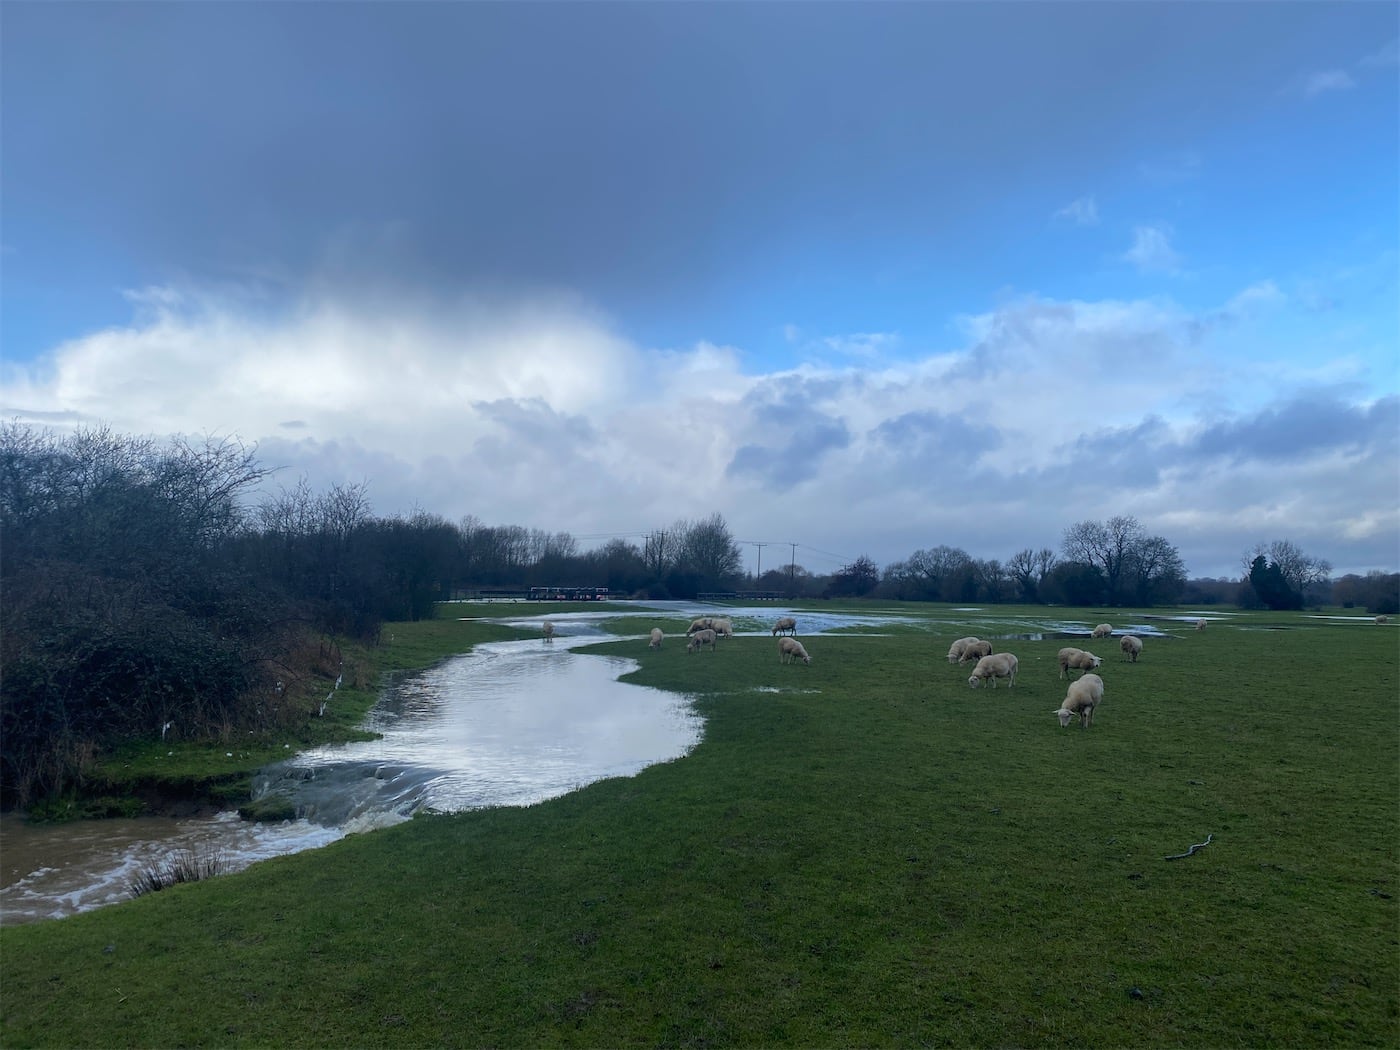 There shouldn’t be water flowing across this field. What I thought from a distance was a wet tarmac access road to the river infrastructure, was actually water overflowing the lock and pouring over the grass bank into the field.